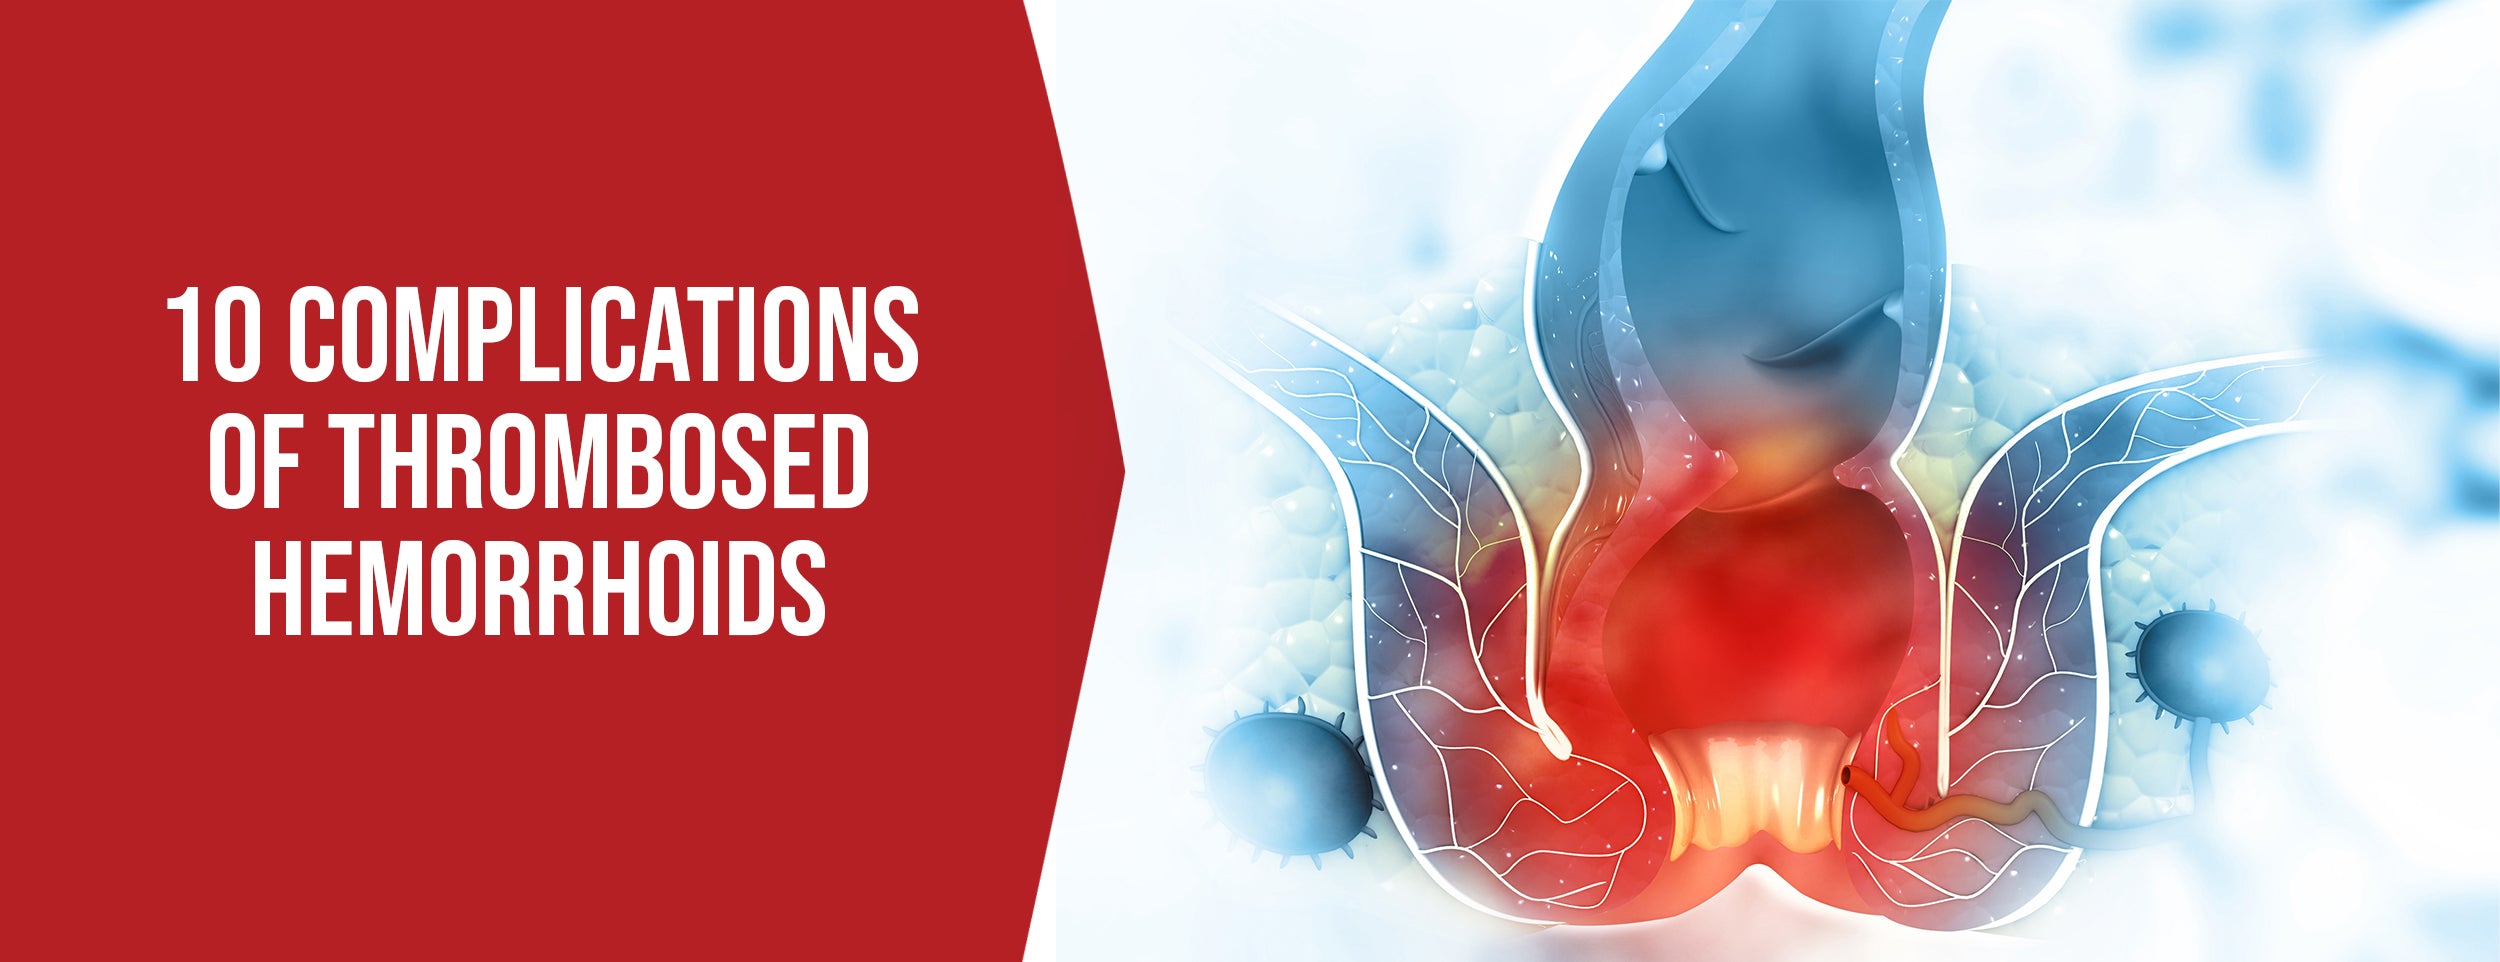 Here are 10 complications associated with thrombosed hemorrhoids